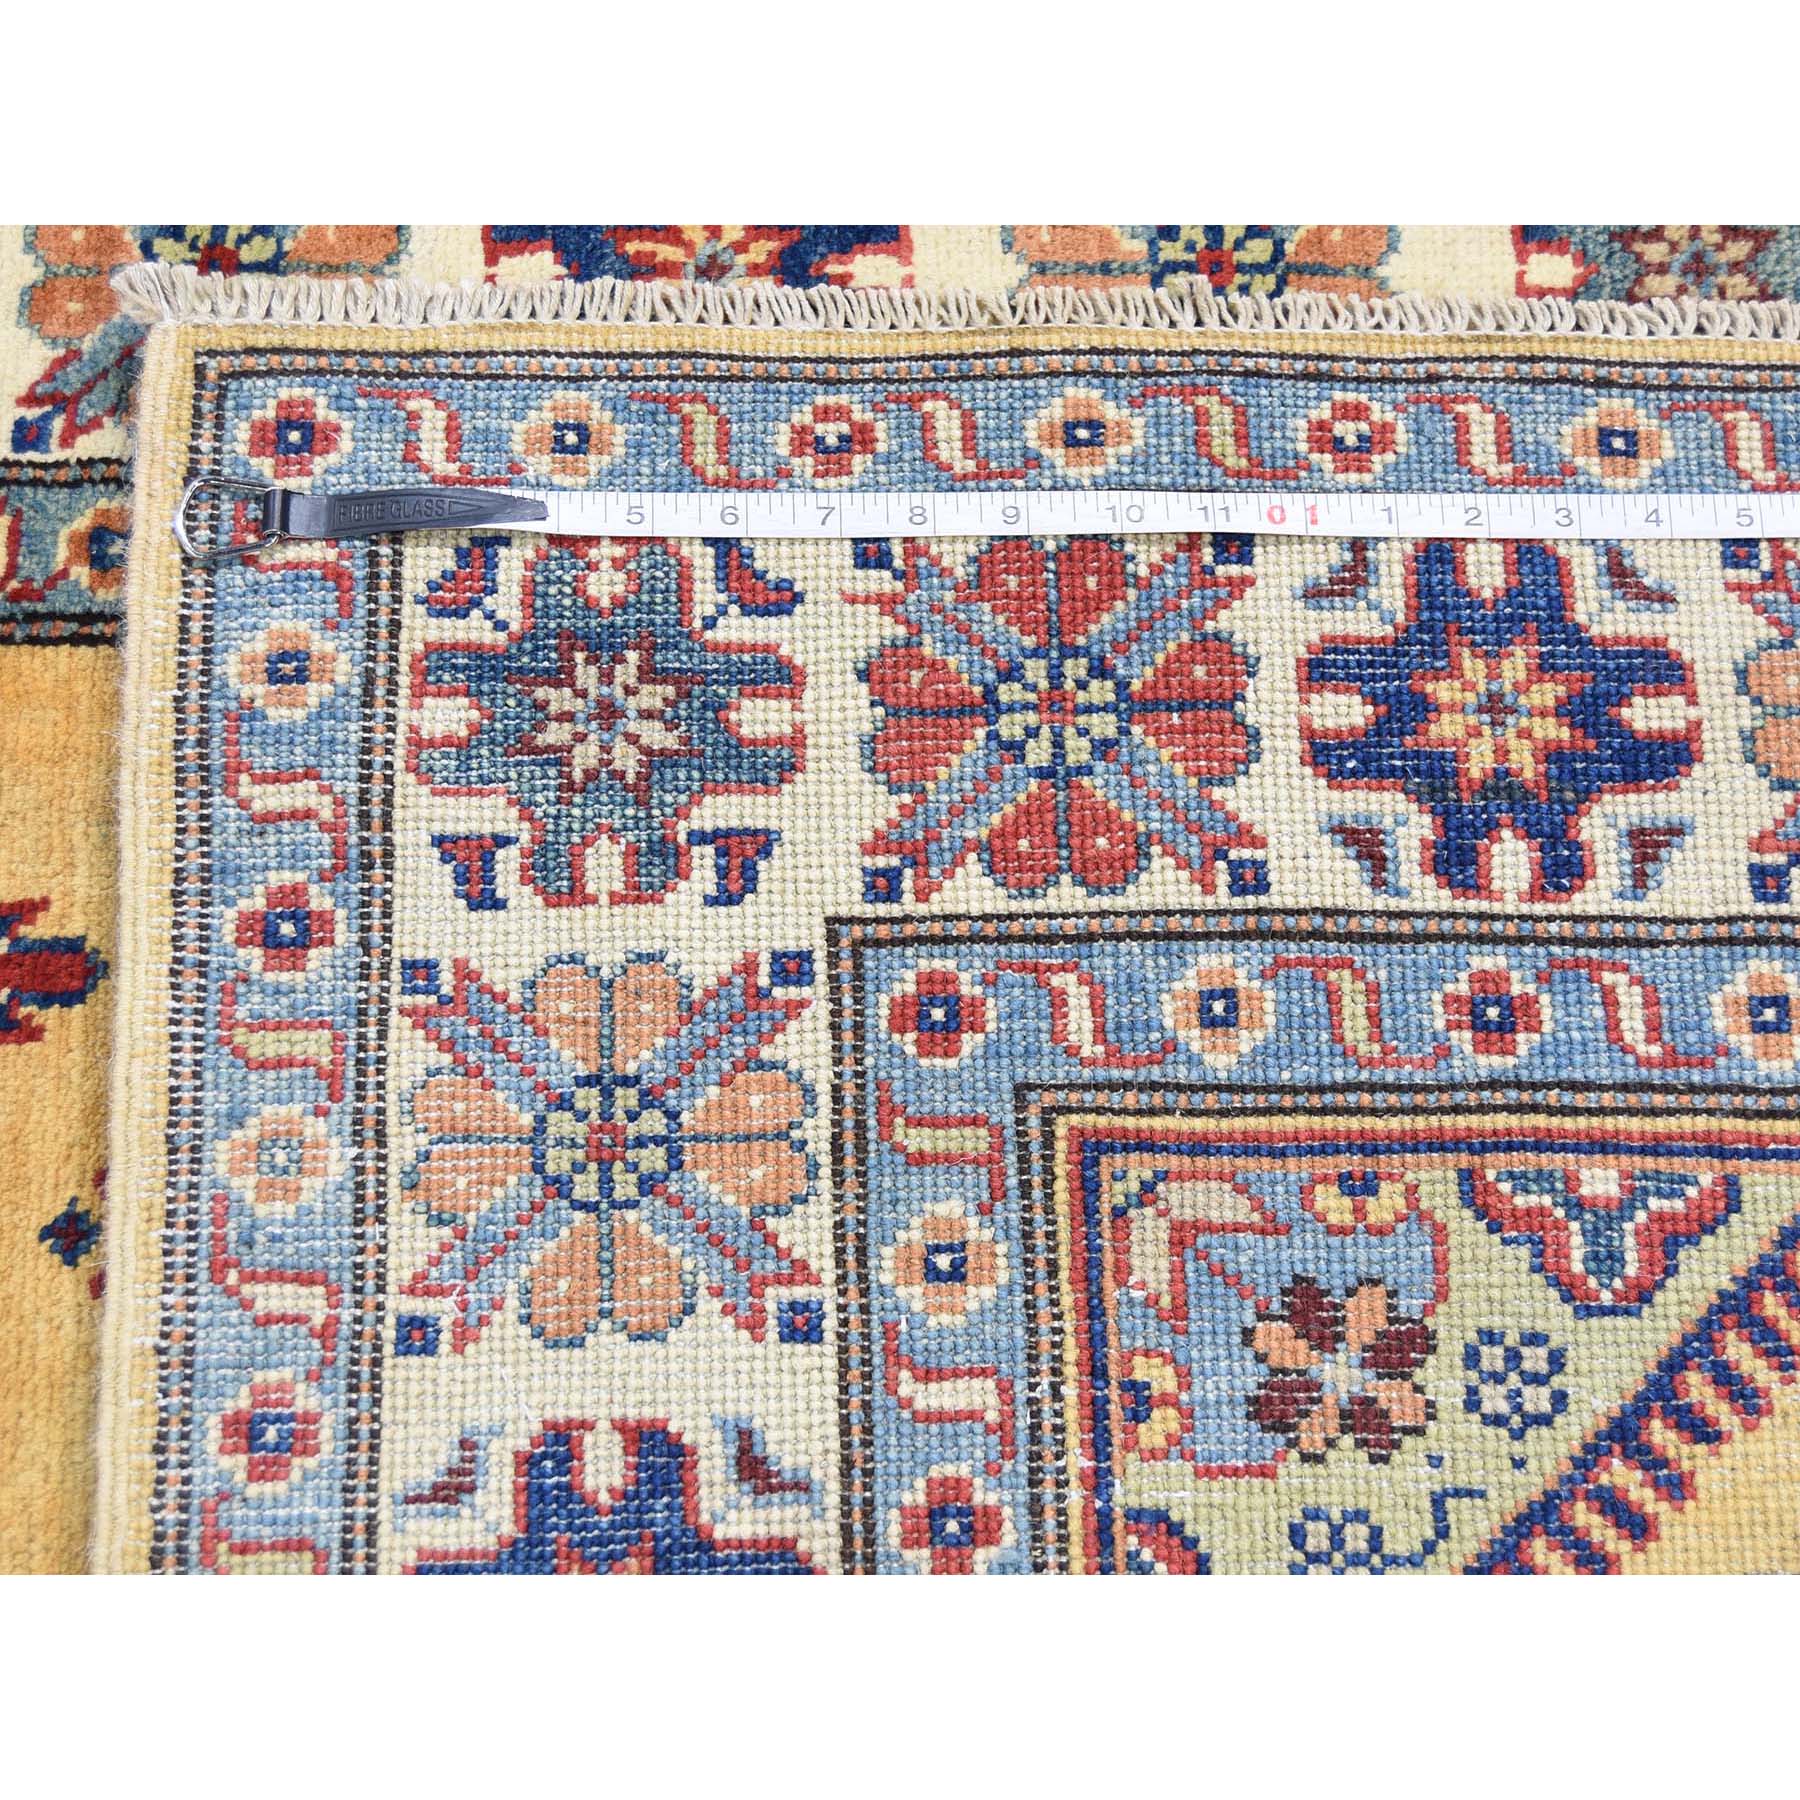 4-2--x5-10-- Gold Special Kazak Tribal Design Hand-Knotted Oriental Rug 